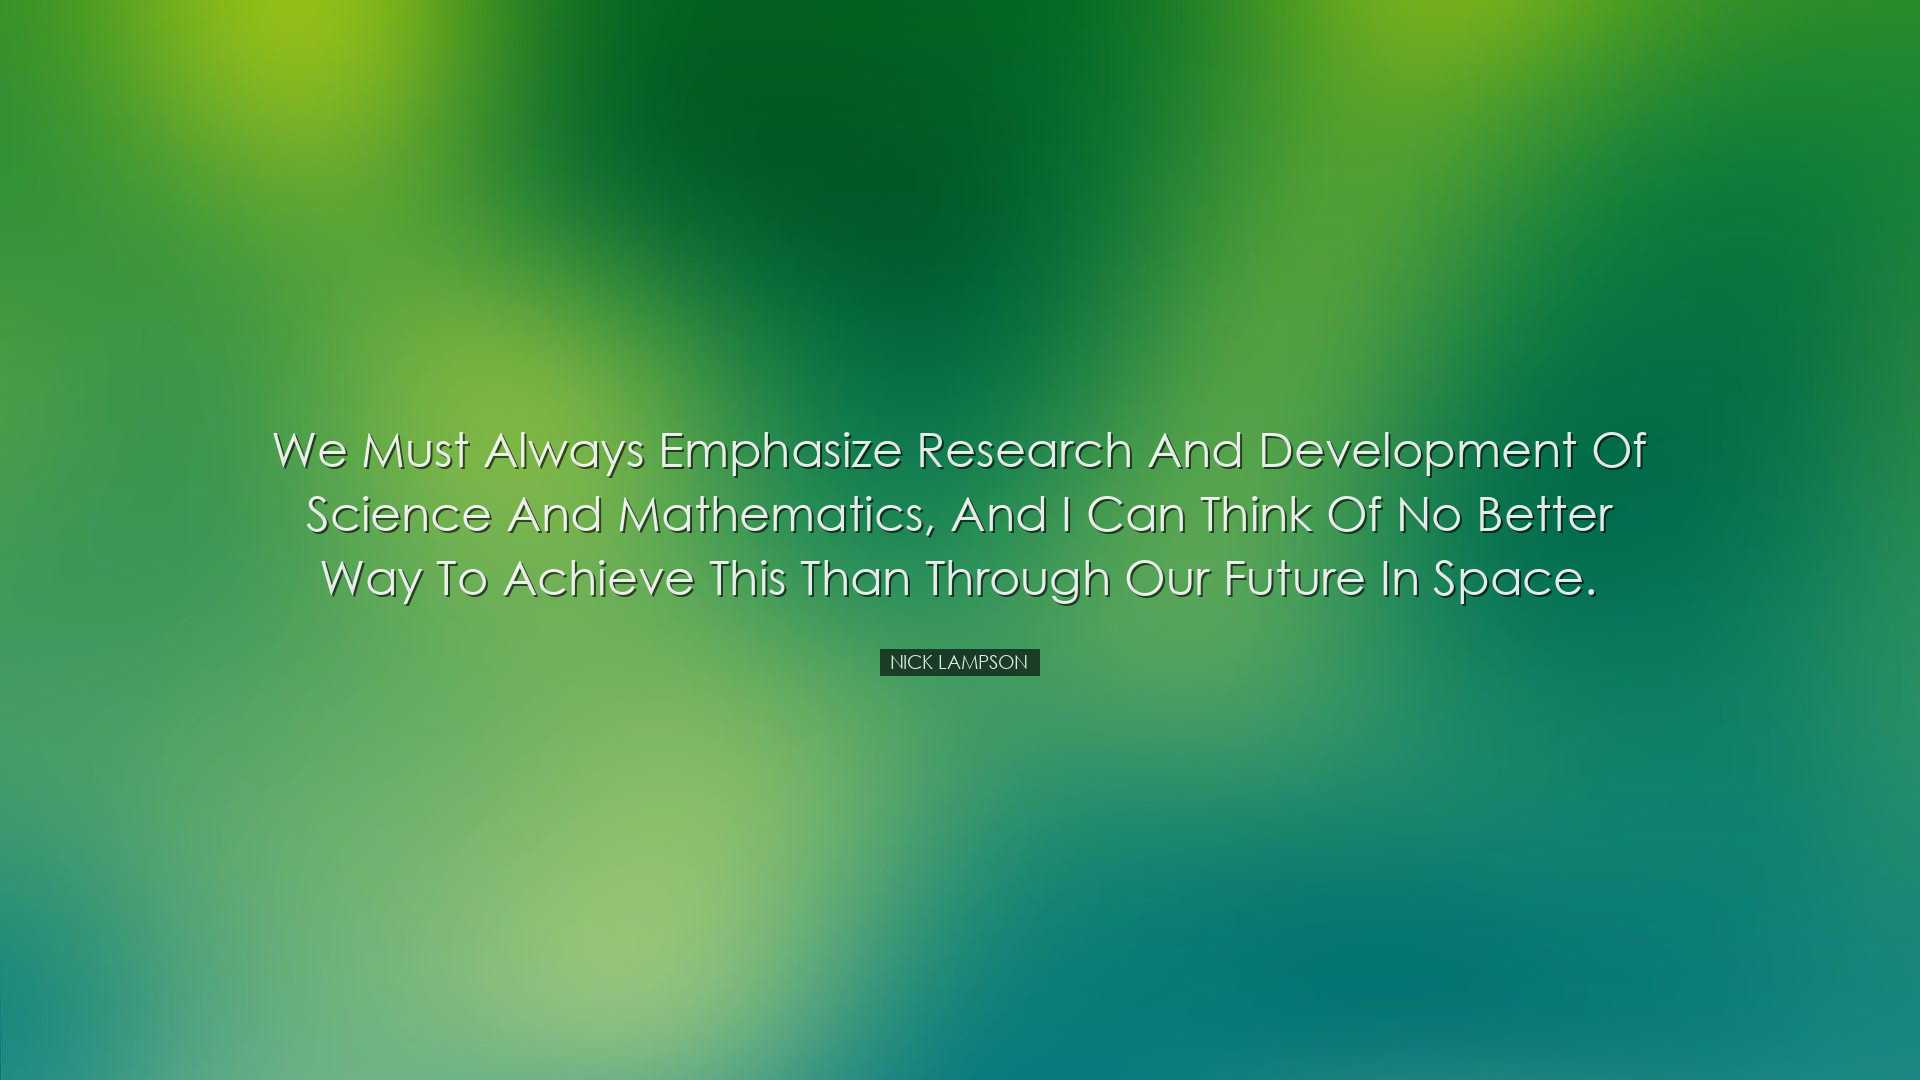 We must always emphasize research and development of science and m